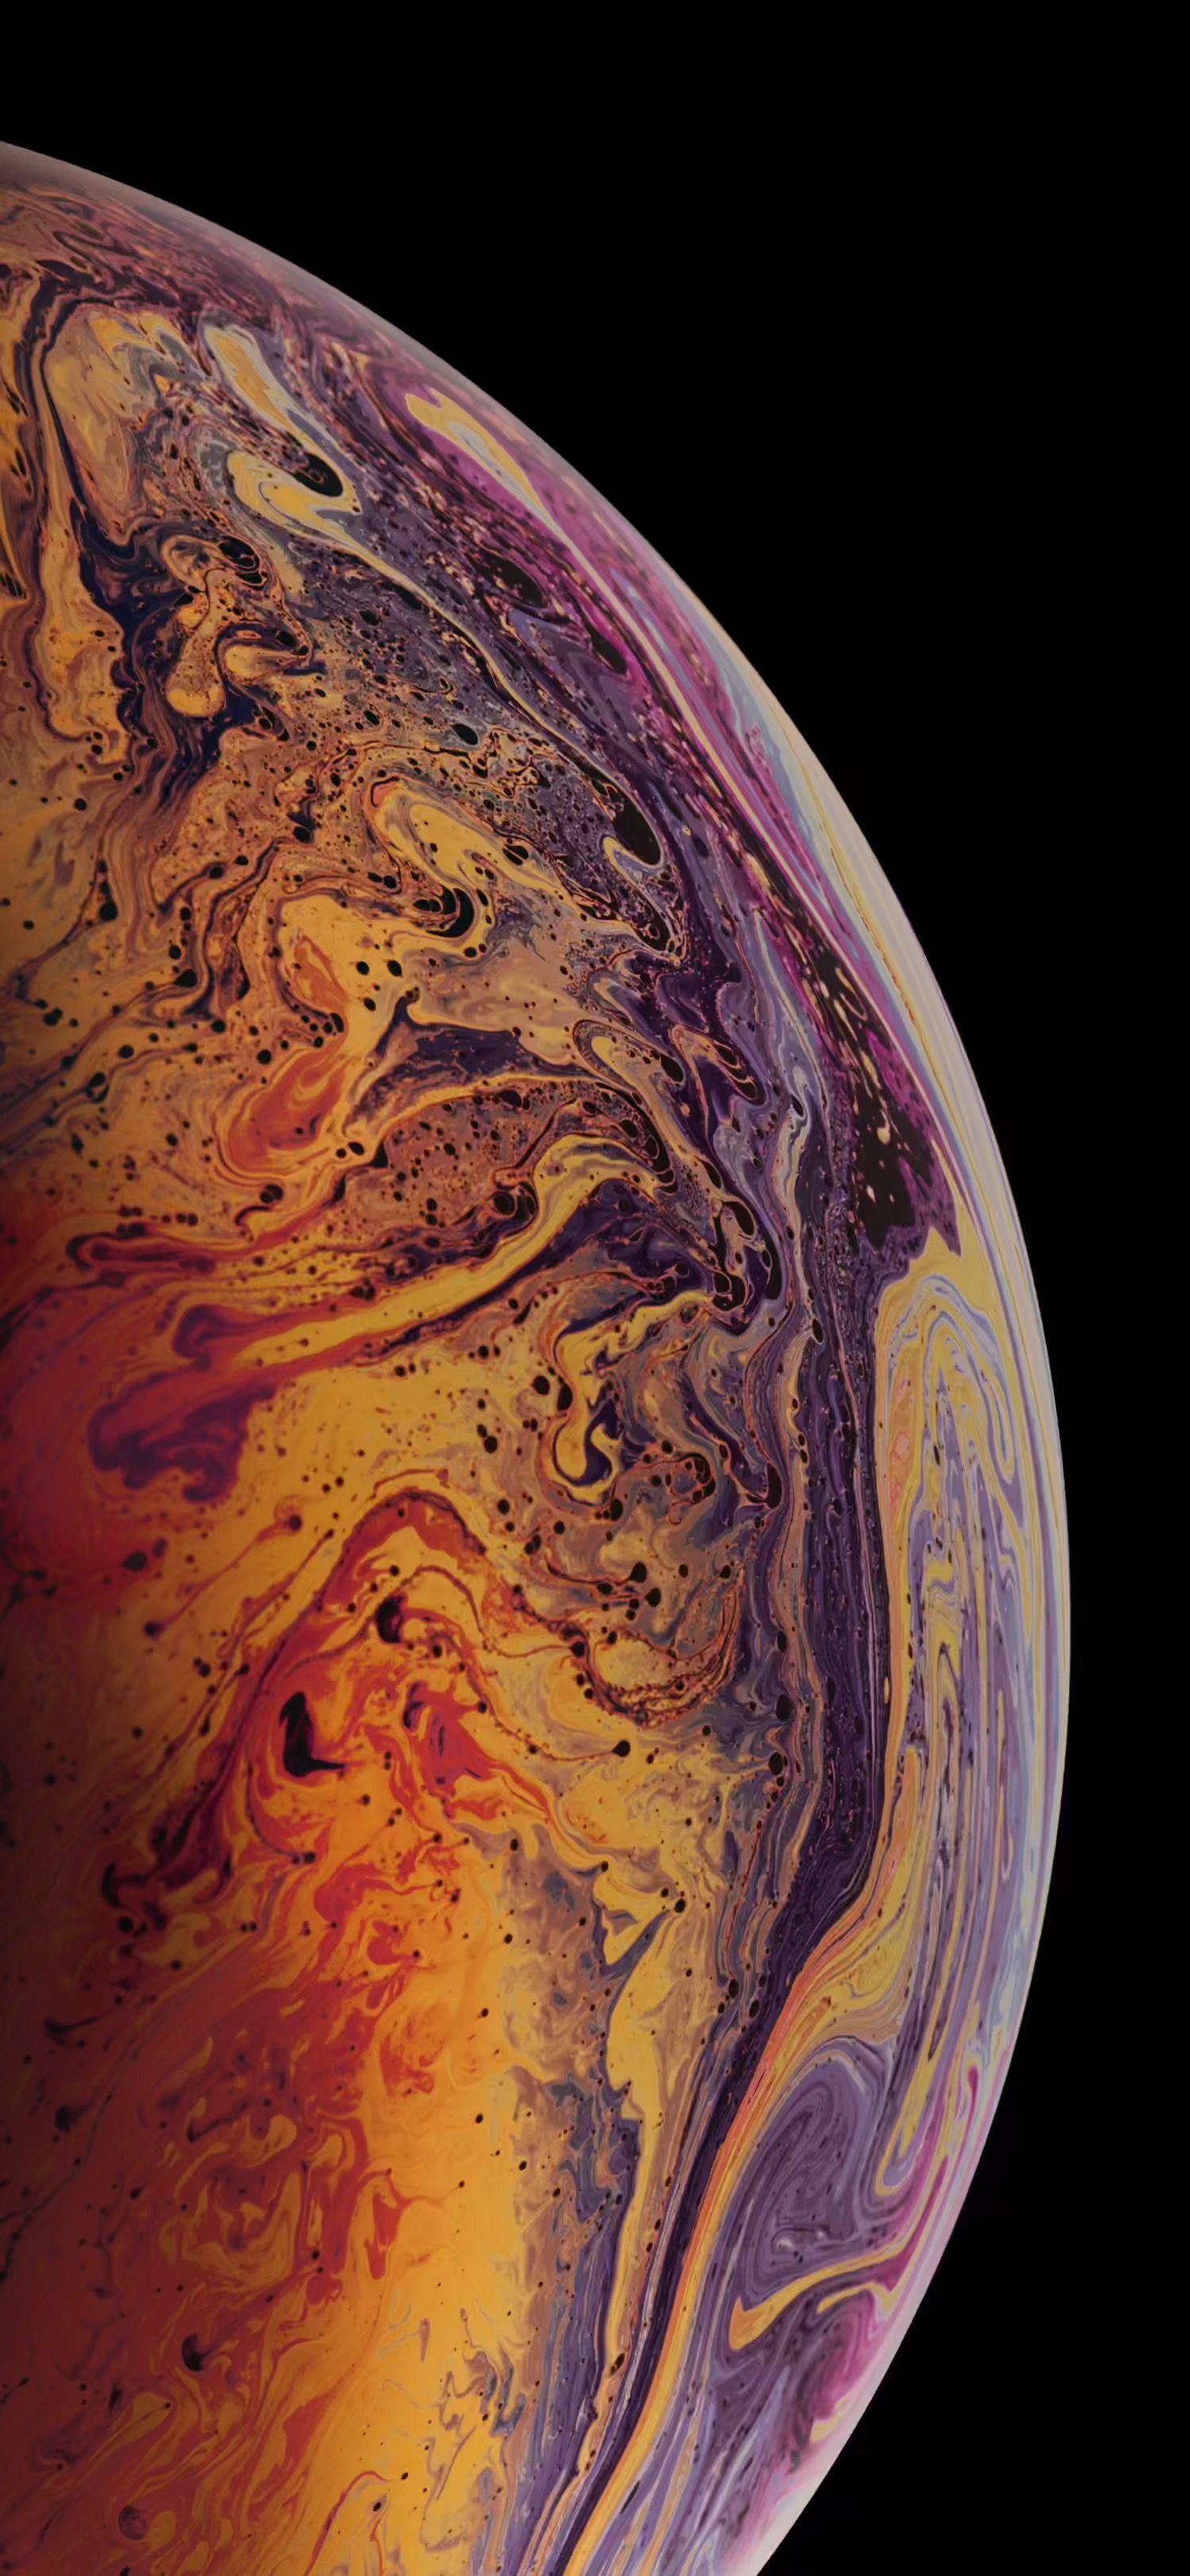 Download The New Iphone Xs And Iphone Xs Max Wallpapers - Iphone Xs Max ...